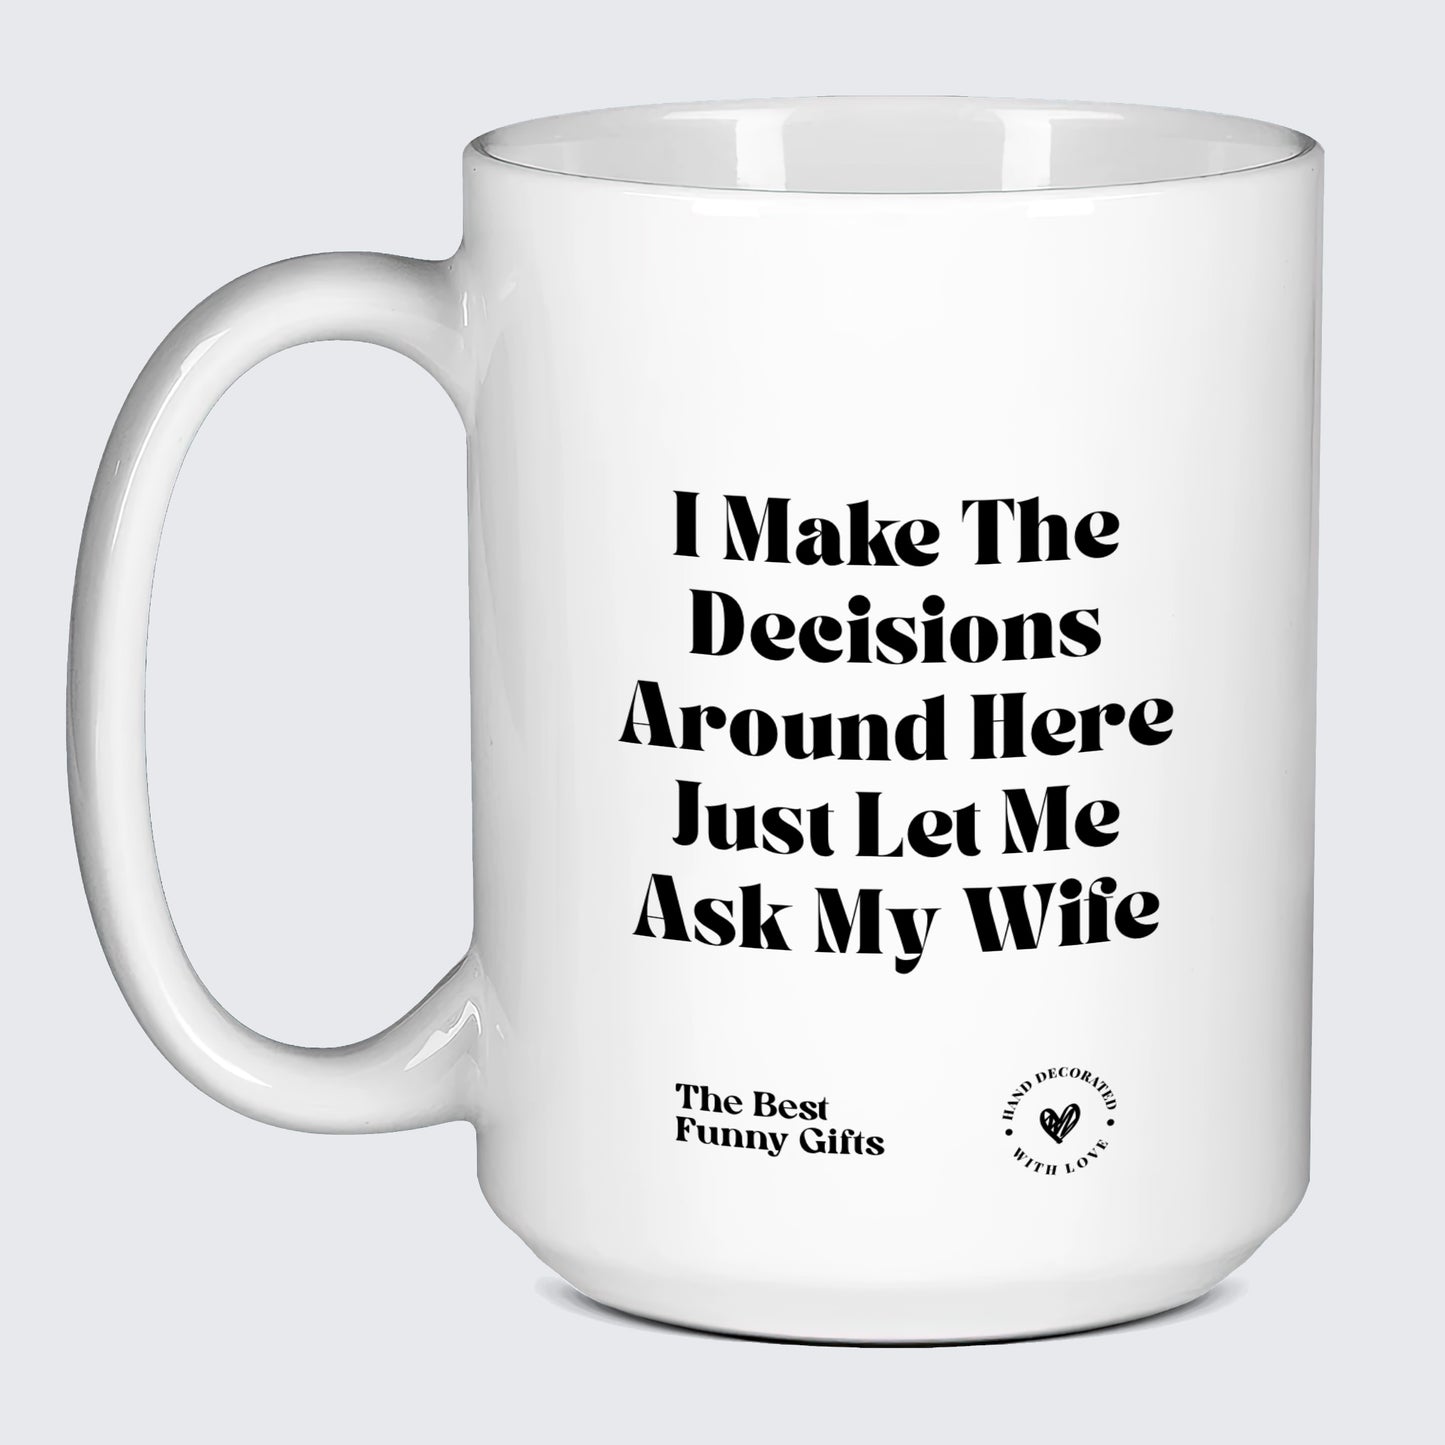 Funny Gift for Dad I Make the Decisions Around Here Just Let Me Ask My Wife - The Best Funny Gifts